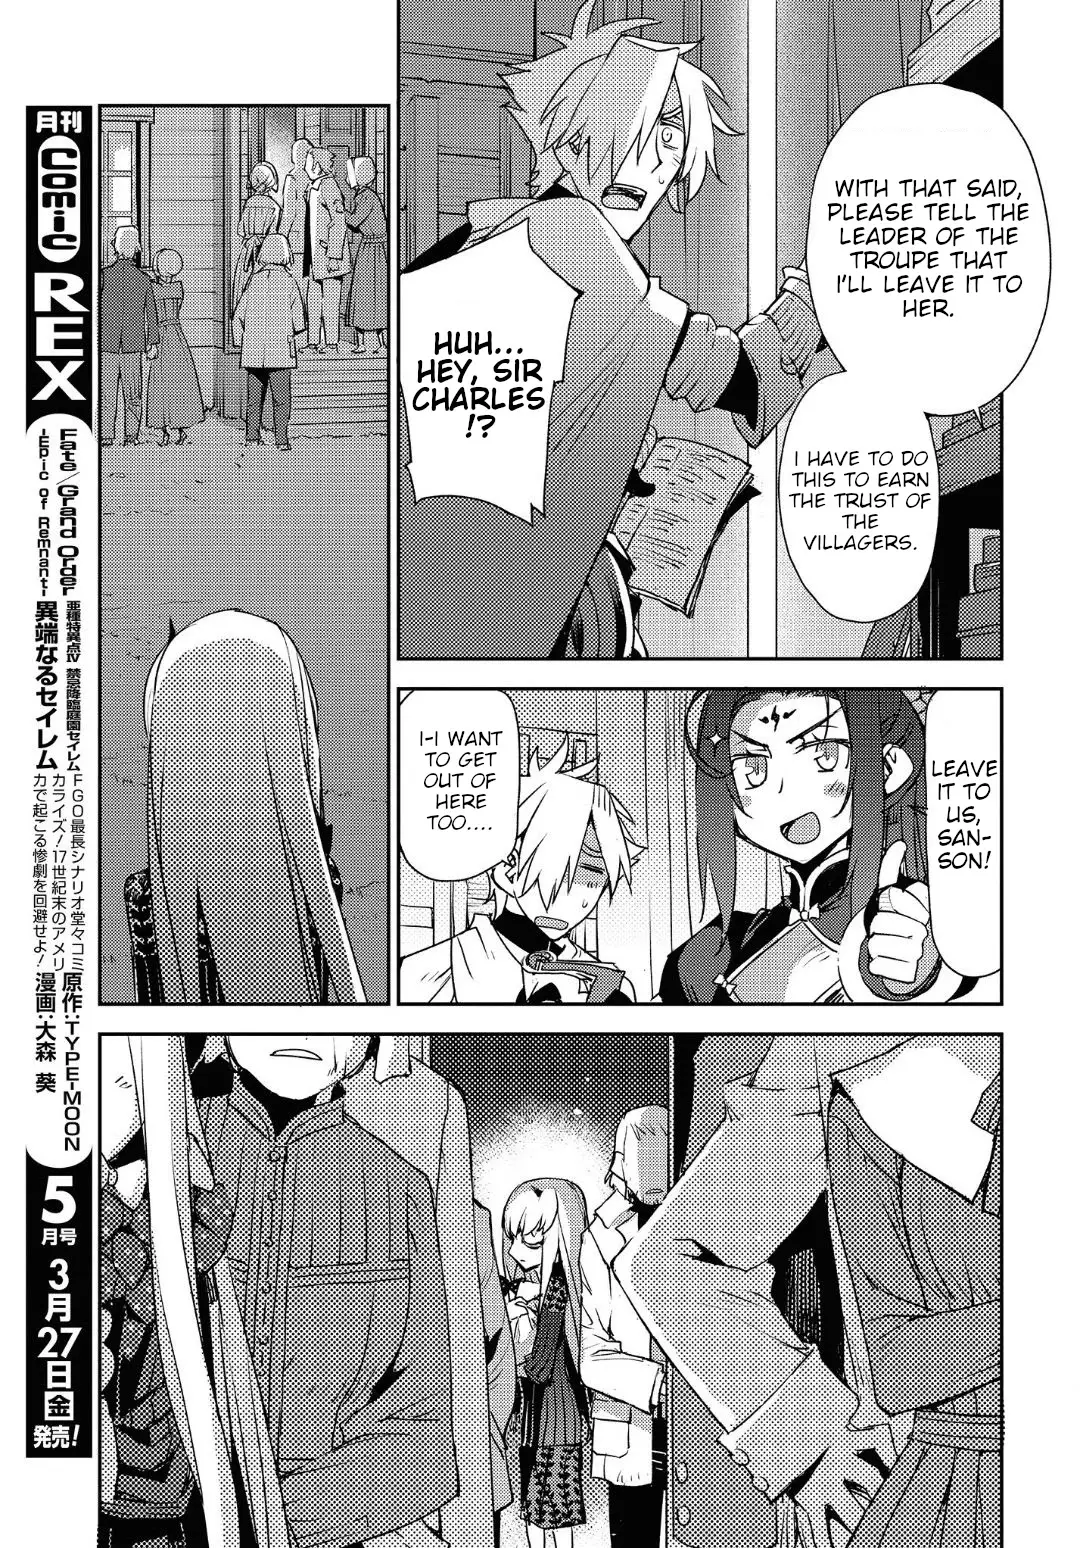 Fate/grand Order: Epic Of Remnant - Subspecies Singularity Iv: Taboo Advent Salem: Salem Of Heresy - 14 page 4